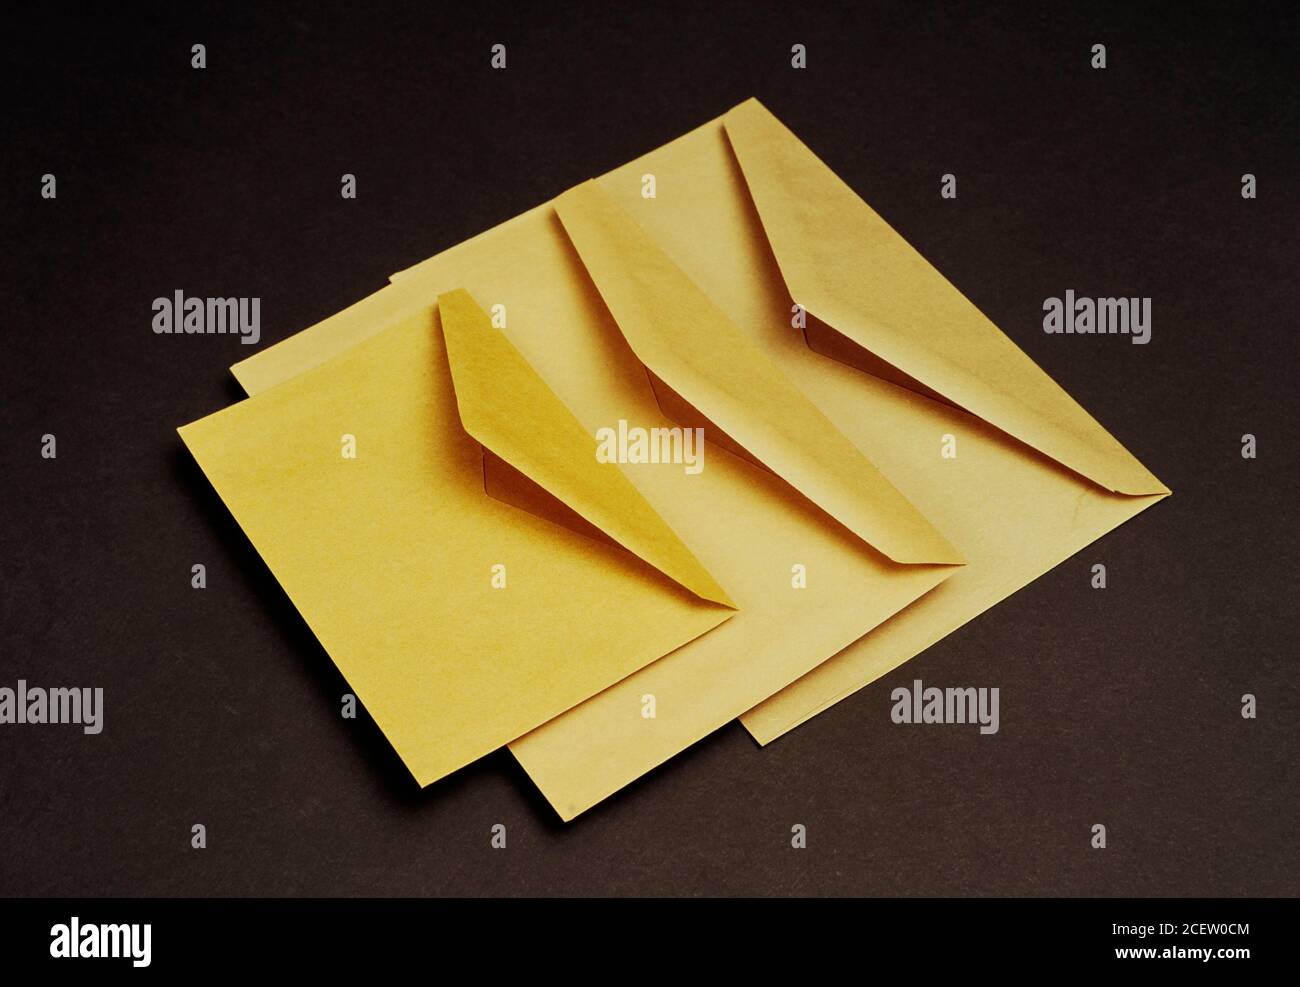 Examples of different sizes of yellow envelopes to send letters, paperwork, and so on. Envelopes used for mail. Stock Photo